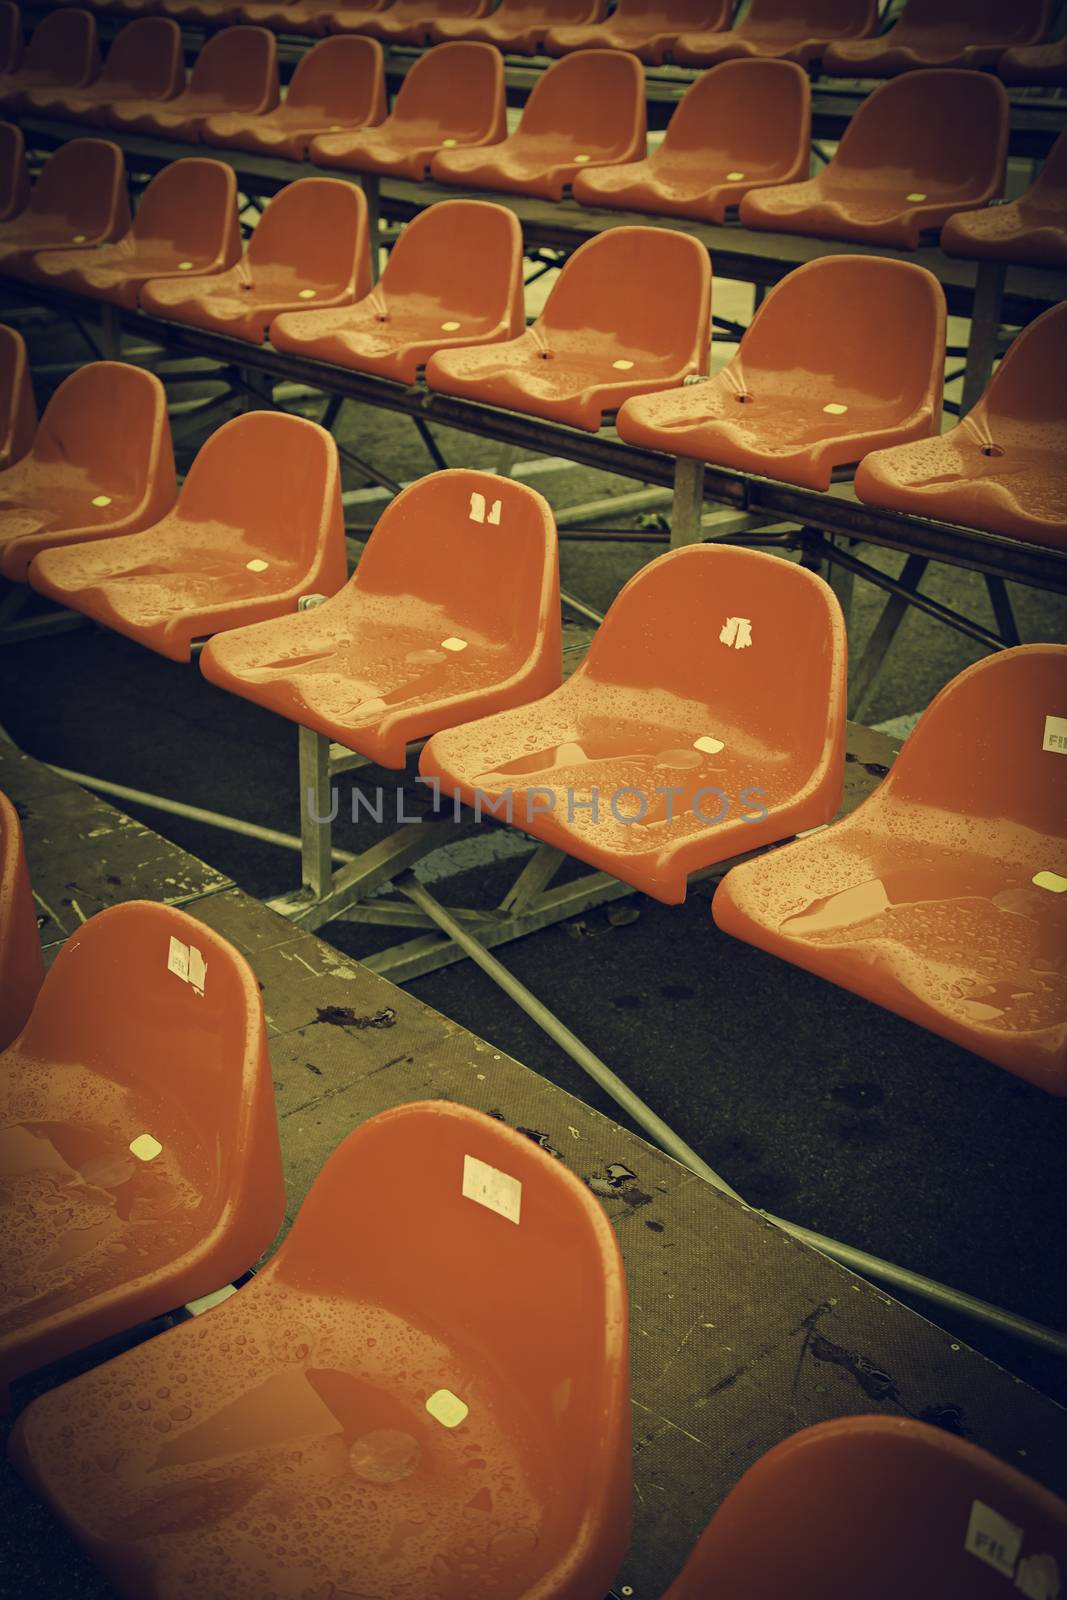 Bleachers for spectators, detail of red seats in a show, fun